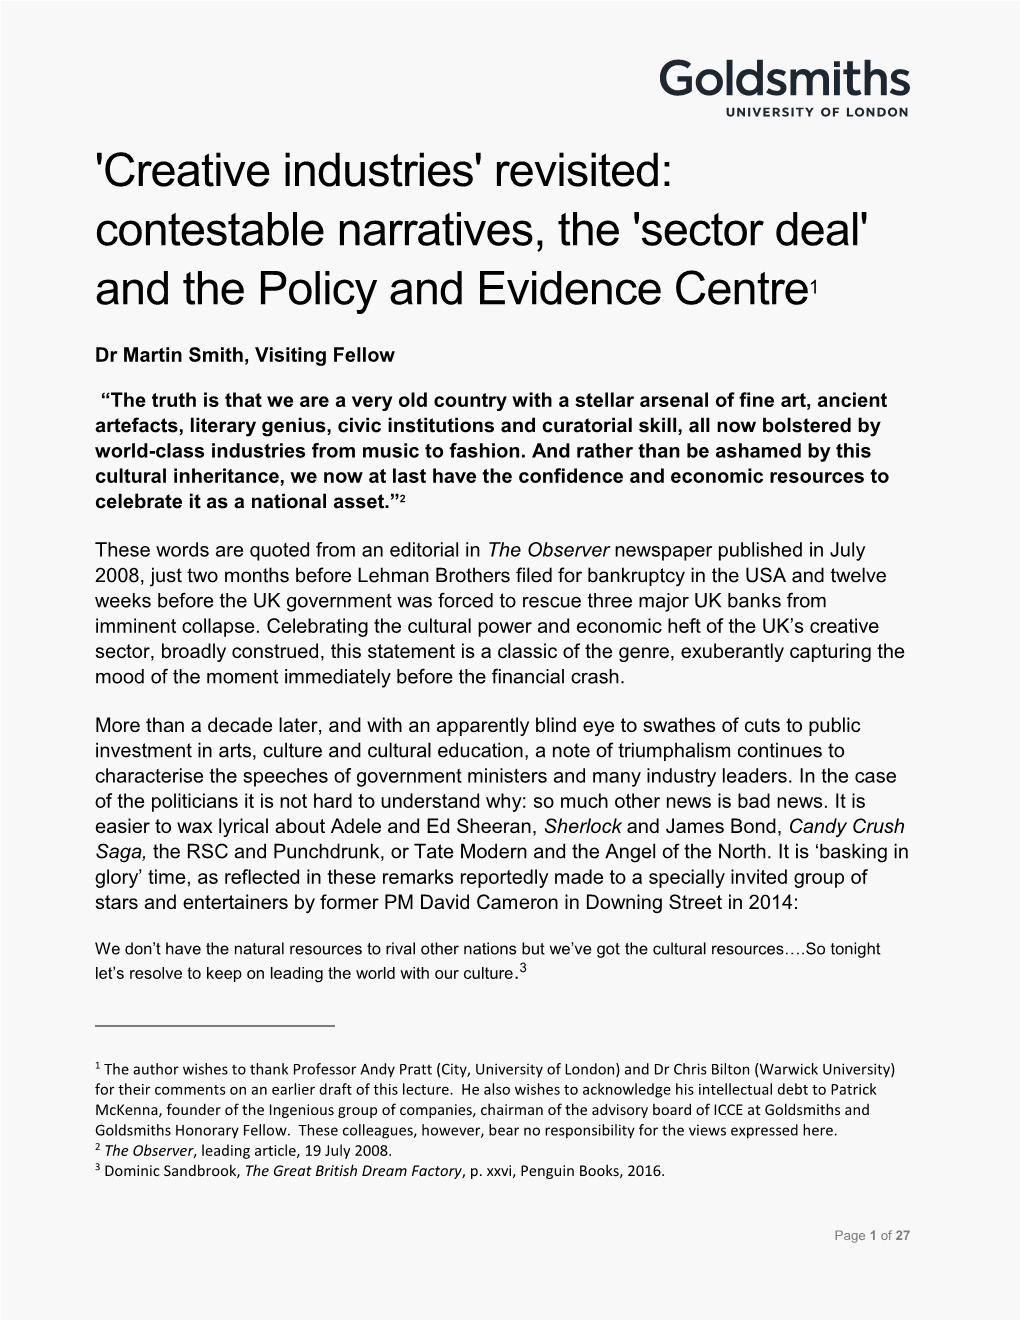 'Creative Industries' Revisited: Contestable Narratives, the 'Sector Deal' and the Policy and Evidence Centre1